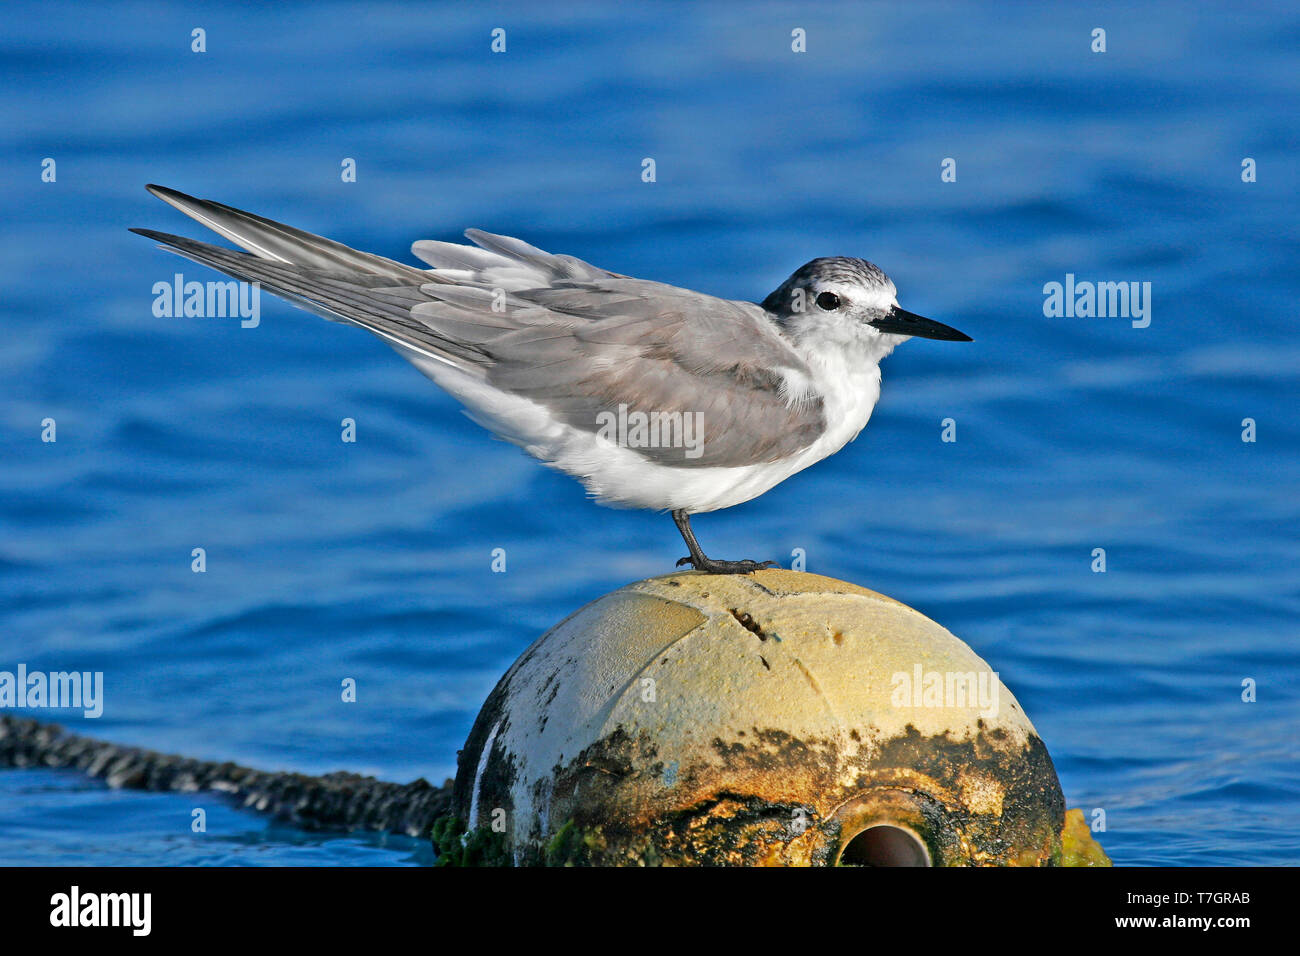 Spectacled tern (Onychoprion lunatus), also known as the grey-backed tern, standing on a buoy in tropical seas in Polynesia. Stock Photo